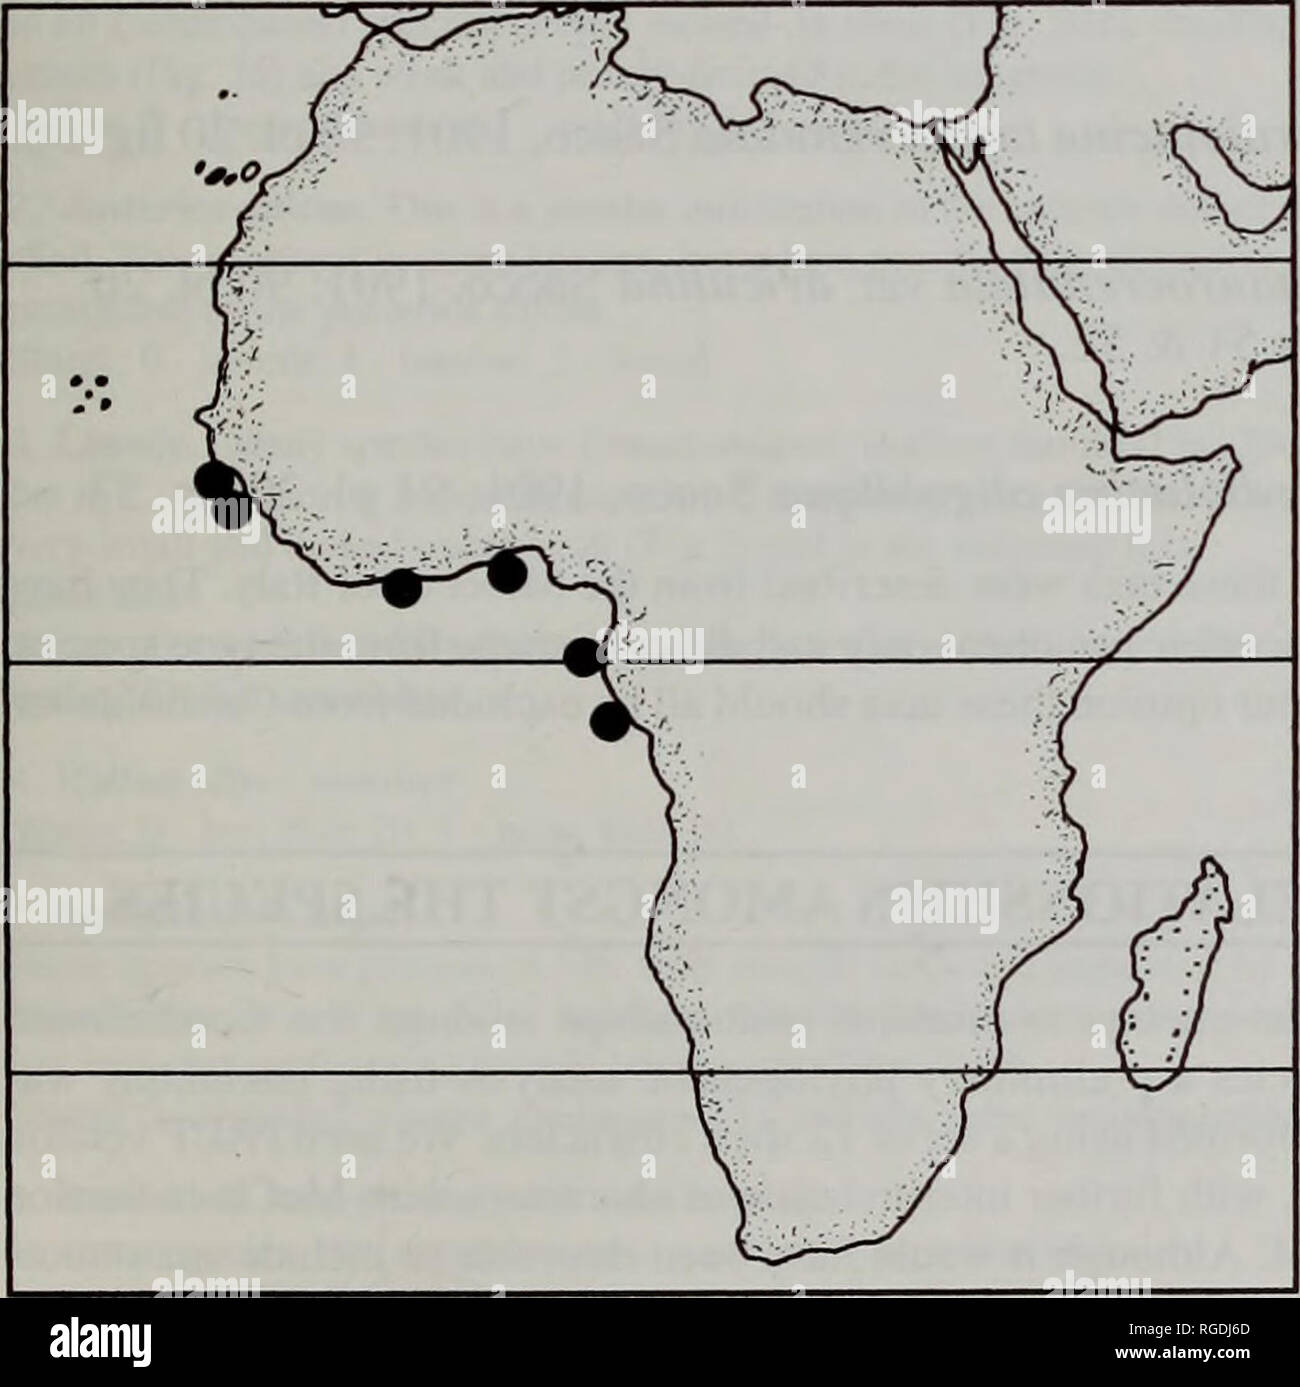 . Bulletin of the Natural History Museum Zoology. Fig. 27 Cardiolucina lamothei (Dautzenberg, 1913) and C. rehderi (Britten, 1972). a, C. kunuthei lies de Los. nr Conakry. Guinea (NMW 1955.158) Left valve. P35.082; b, left valve interior; c, C. rehderi Britton, left valve, Paratype NMNH; d, left valve interior. Scale bar a-d = 1.0mm. DISTRIBUTION. Known only from type material reported on by Britton (1972).. Fig. 28 Geographical distribution of Cardiolucina lamothei (Dautzenberg). Data from Dautzenberg (1913). FOSSIL SPECIES OF CARDIOLUCINA Apart from the description of the type species C. aga Stock Photo